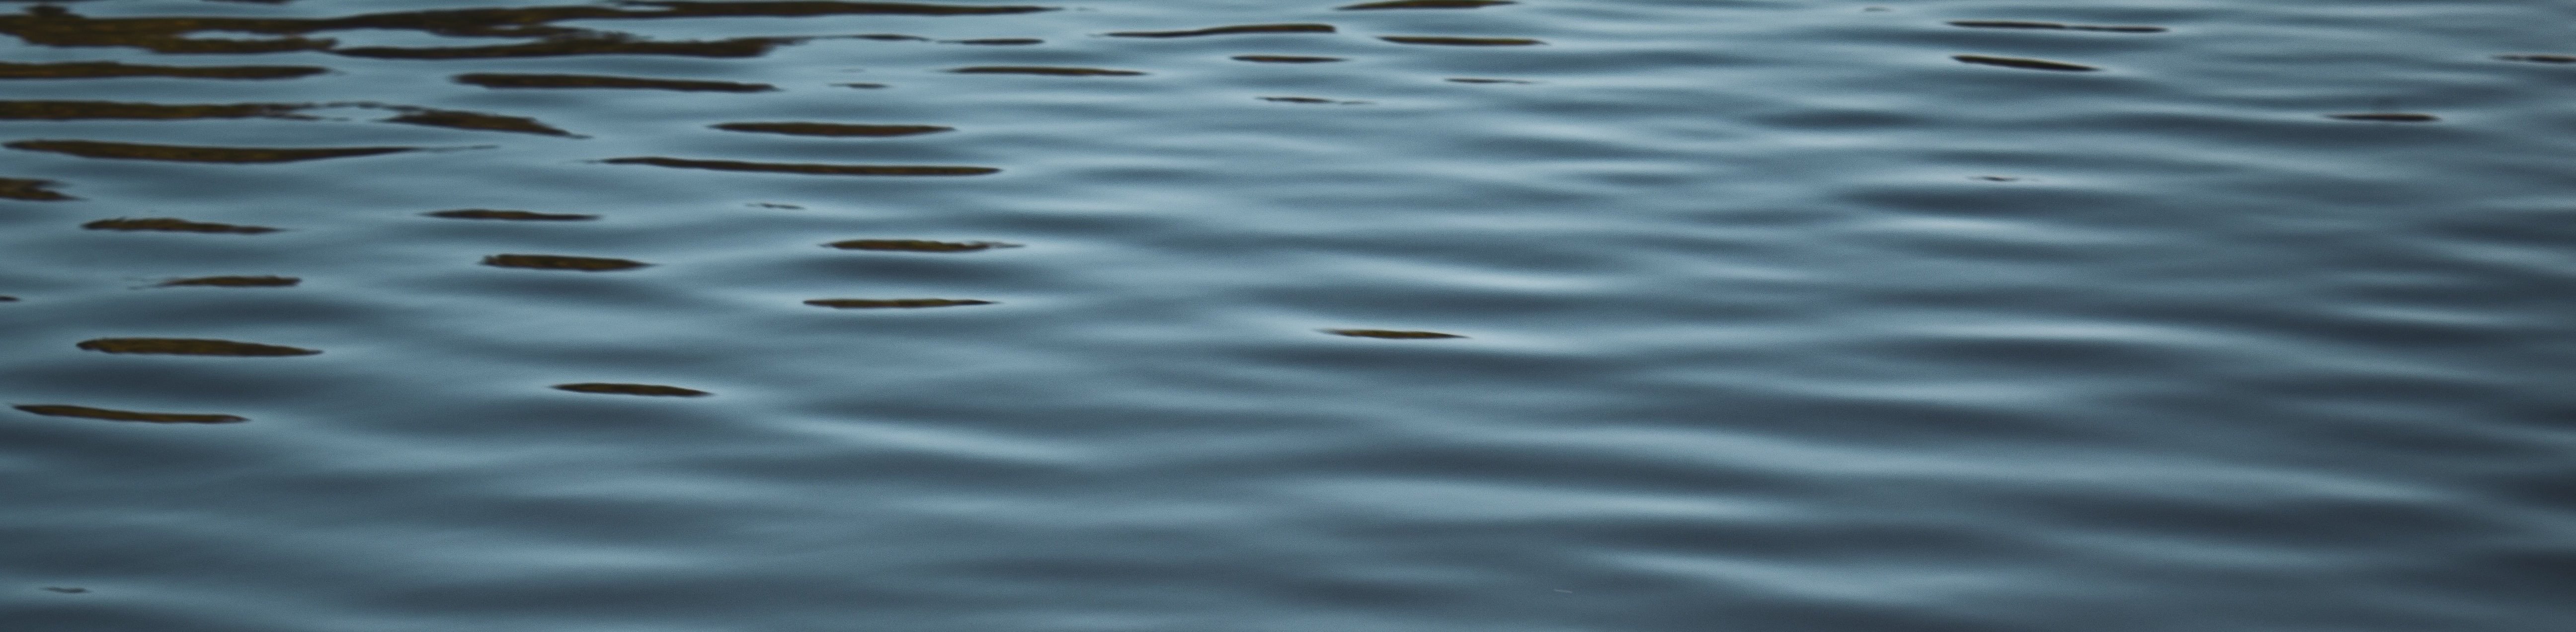 Surface of water with ripples